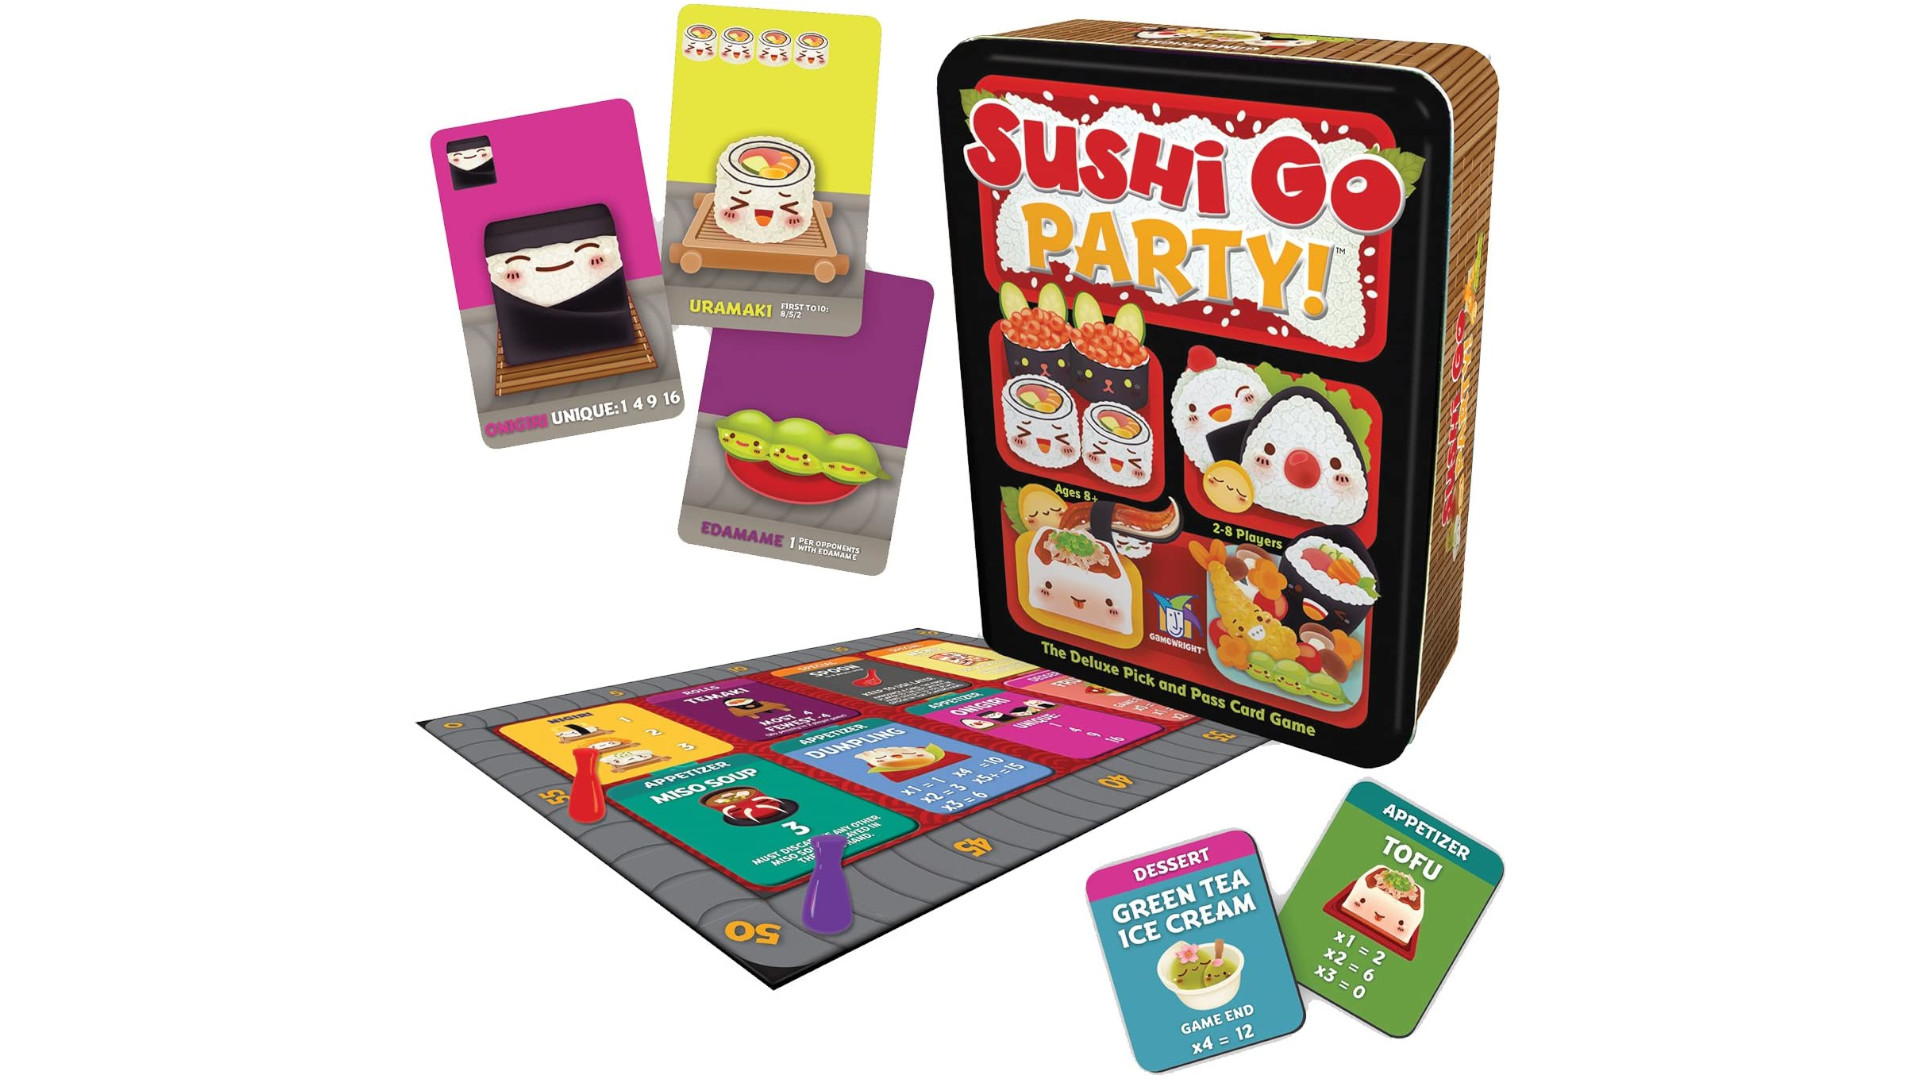 The Sushi Go Party box and cards